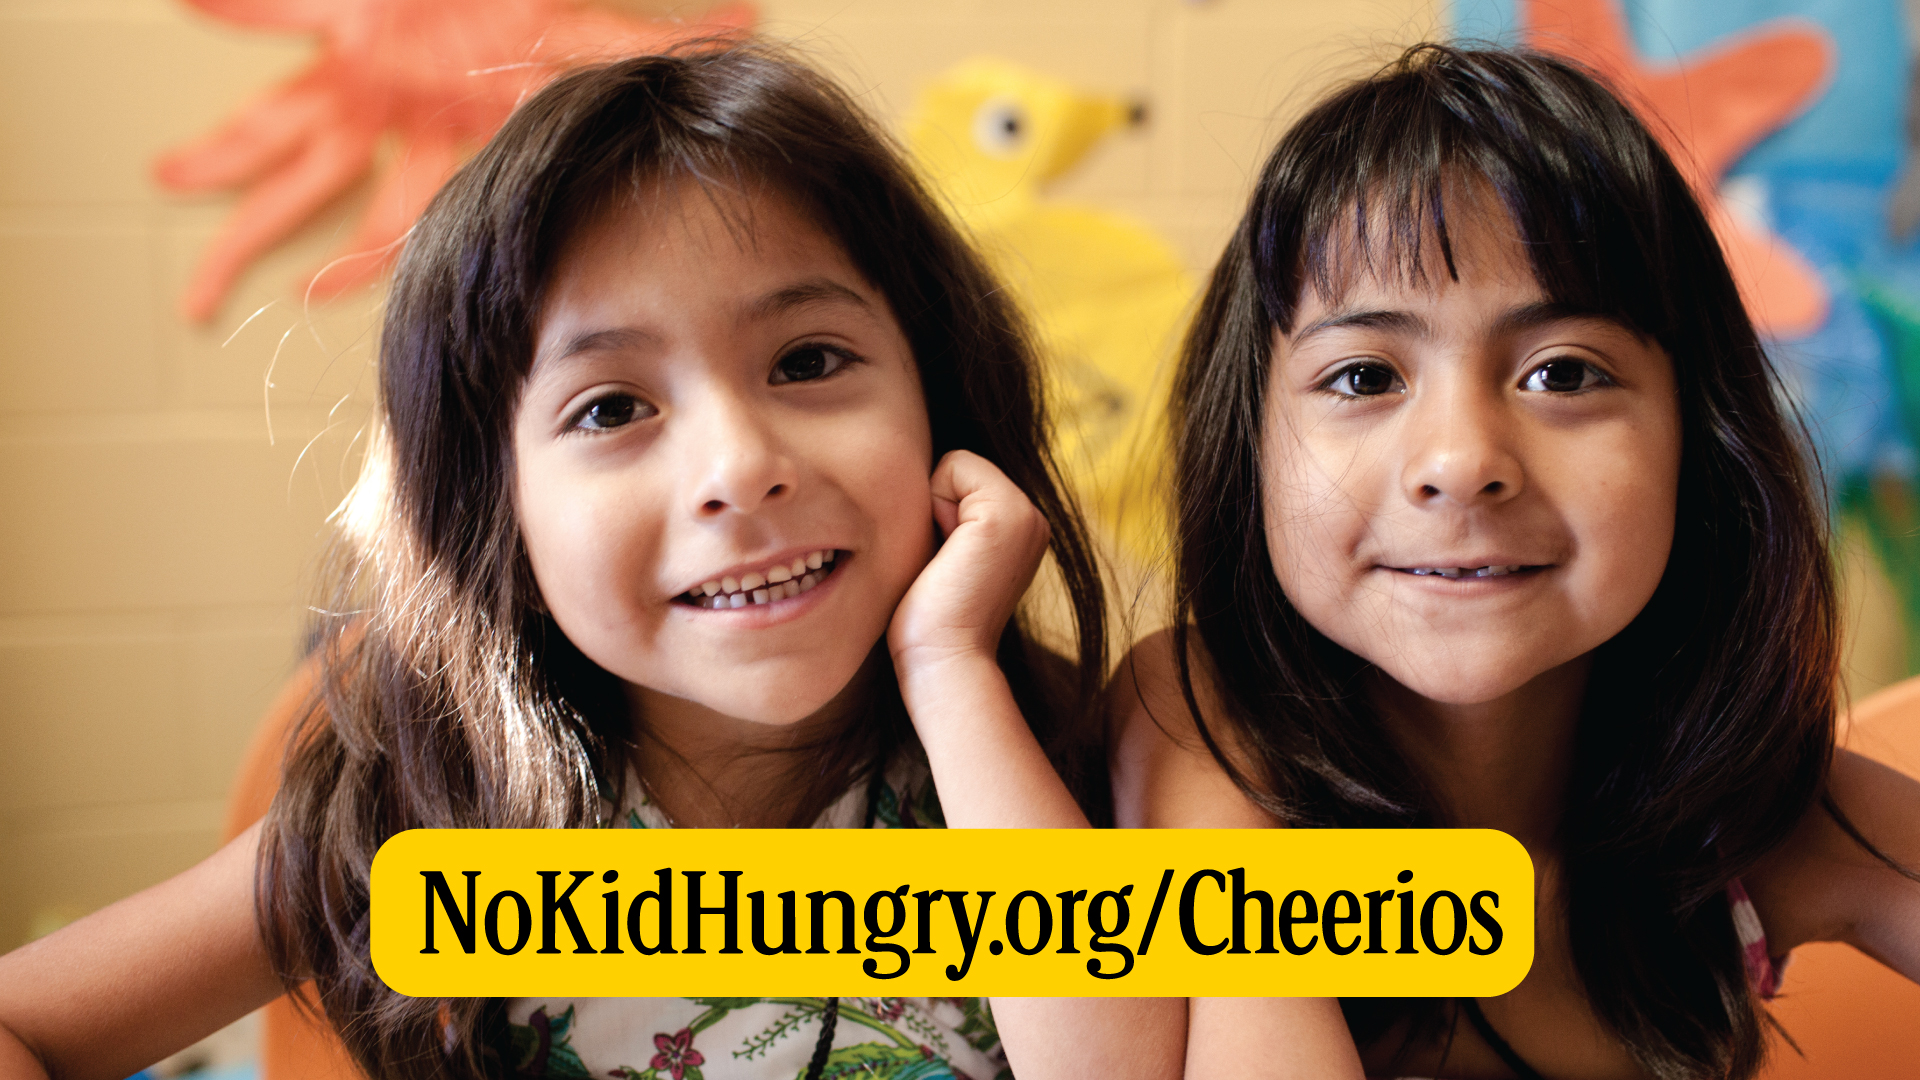 Two girls with nokidhungry.org/Cheerios